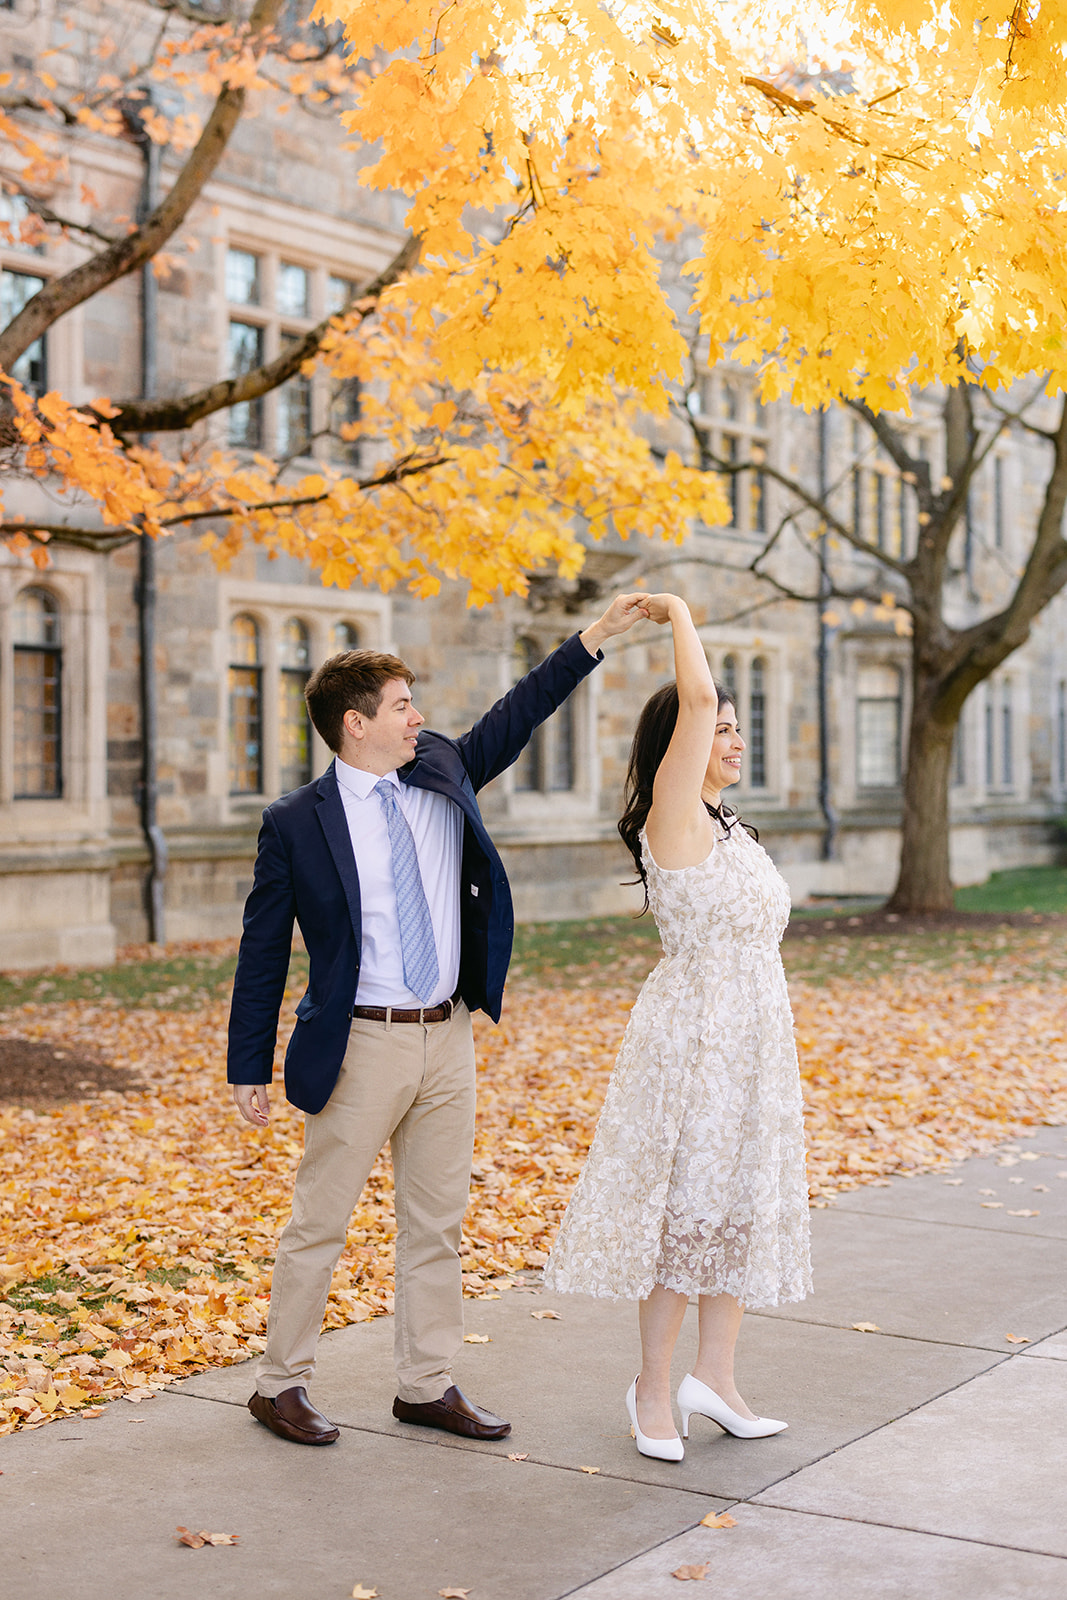 A couple dancing at the Law Quad in Ann Arbor